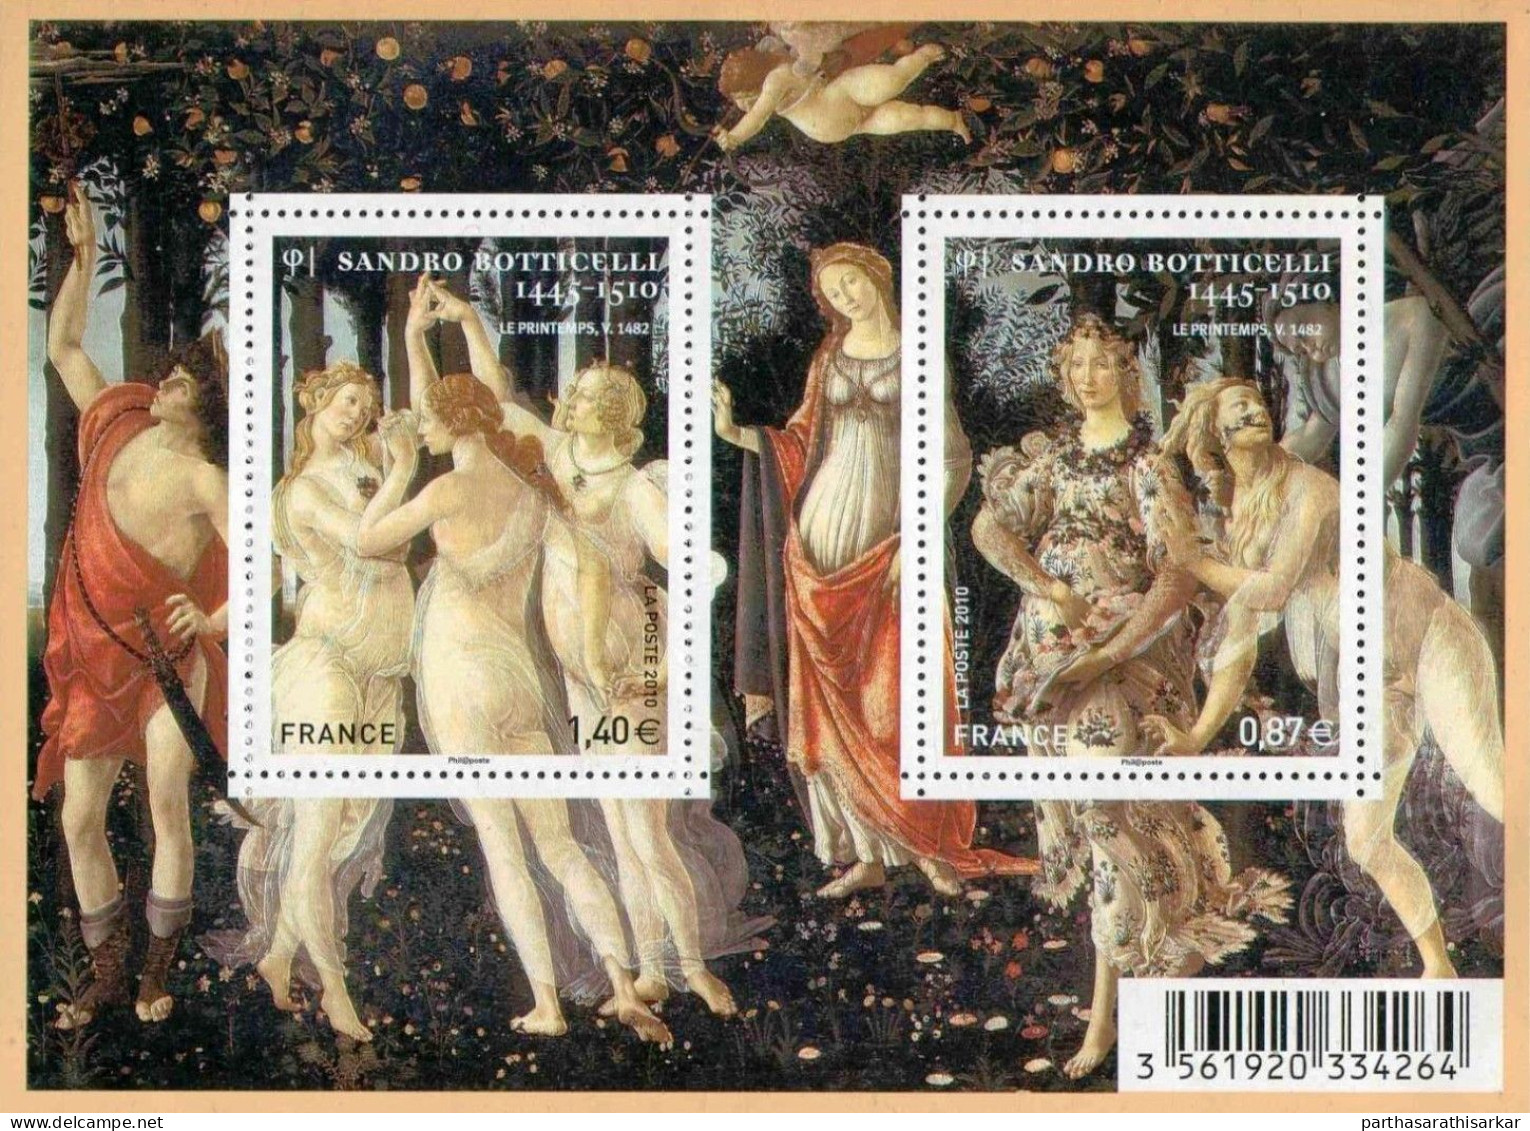 FRANCE 2010 500TH ANNIVERSARY OF THE DEATH OF SANDRO BOTTICELLI, 1445-1510 PAINTINGS MINIATURE SHEET MS MNH - Unused Stamps